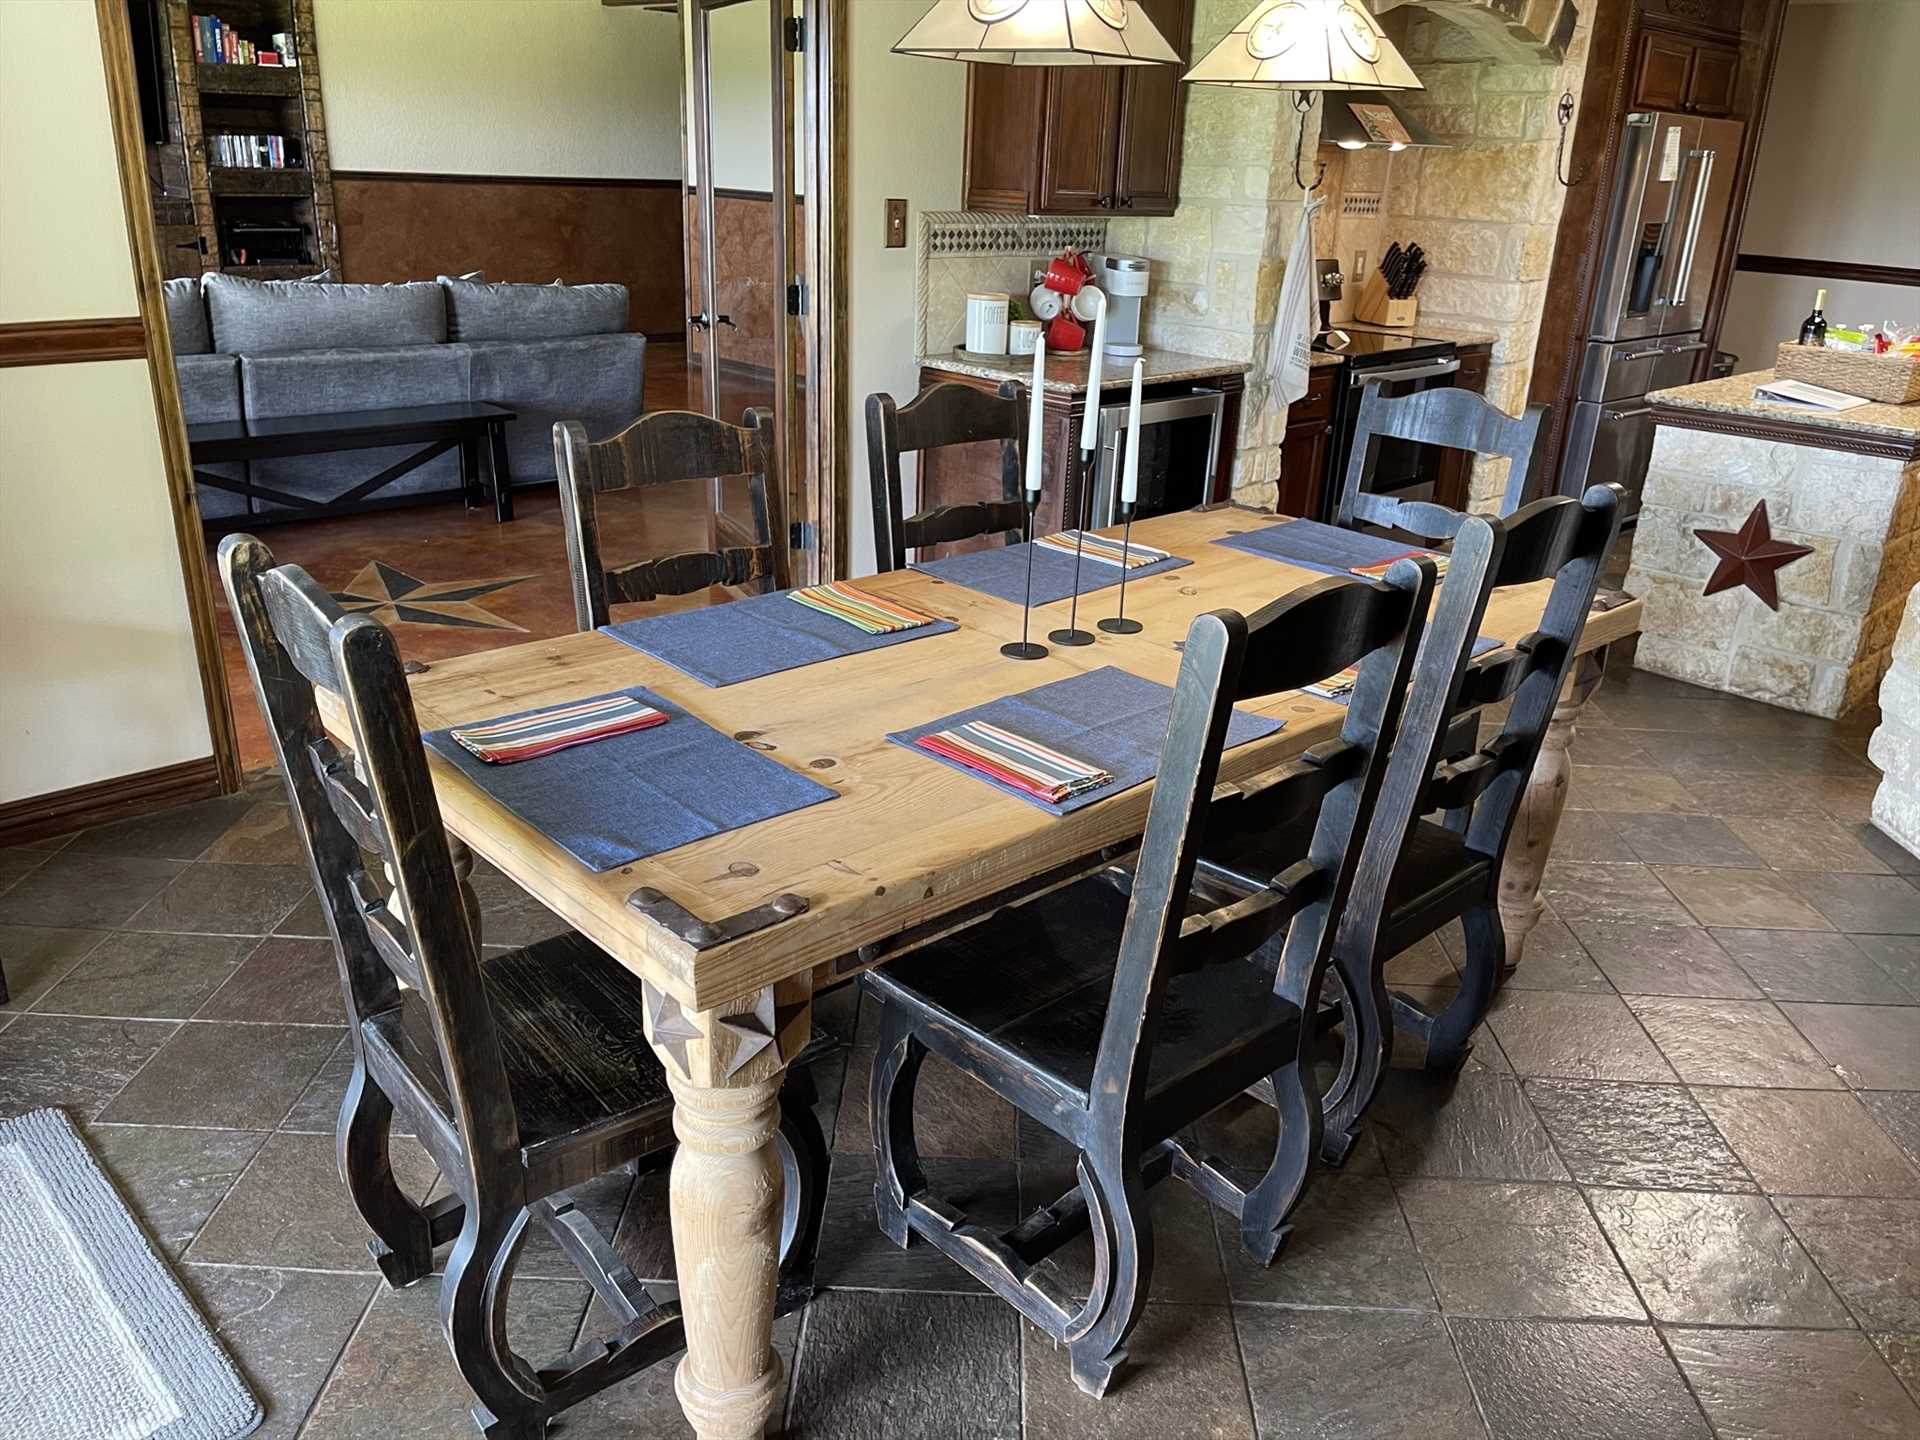                                                 Ample seating space with tasteful country touches make the dining area a wonderful place to gather.